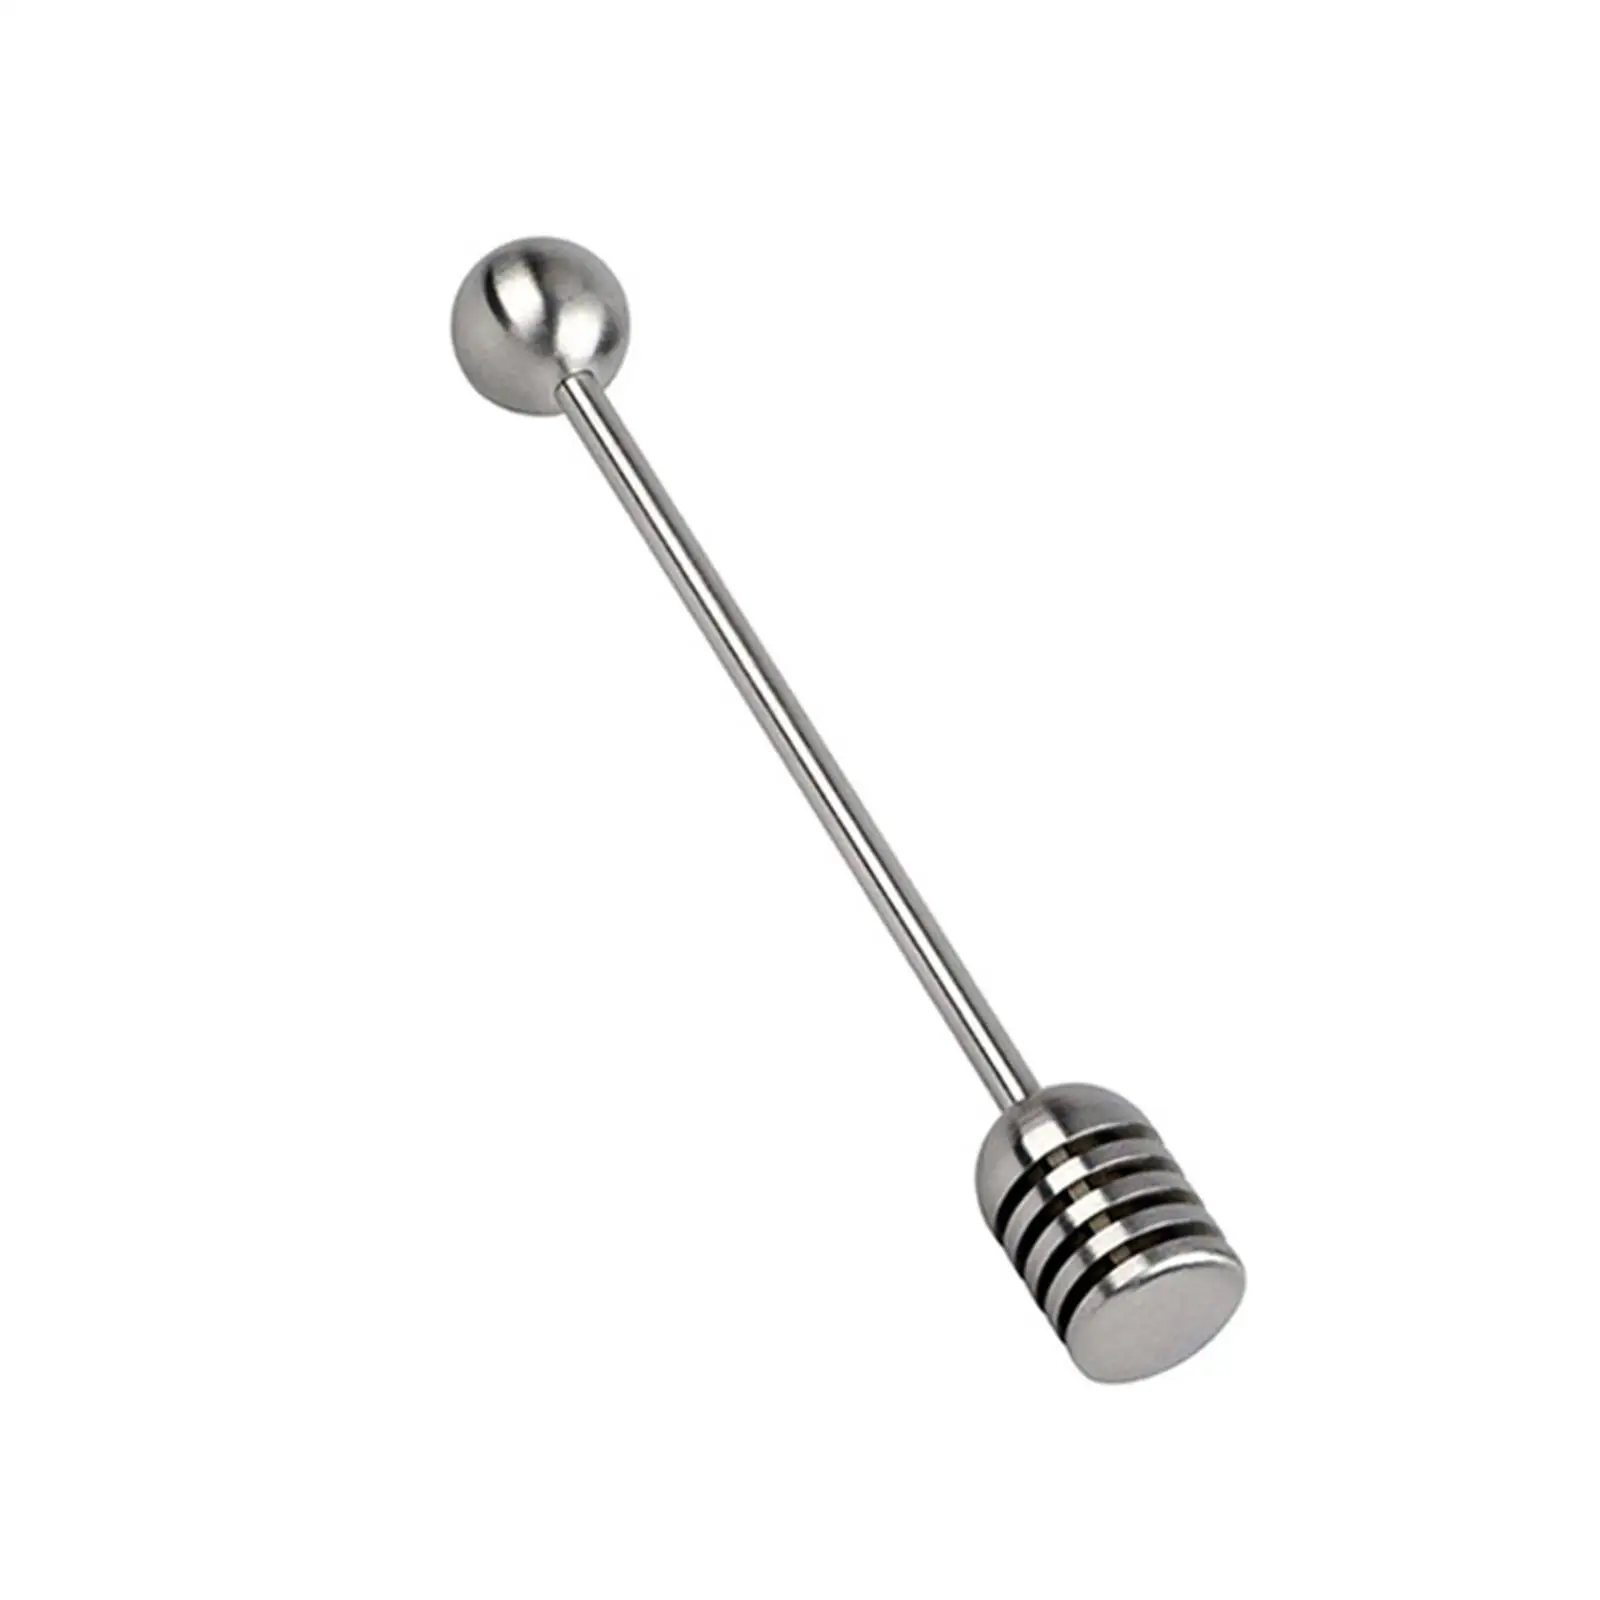 Solid Stainless Steel Honey Dipper Rod Accessories Comfortable Grip Durable Kitchen Utensils Wear Resistant Honey Dipping Tool